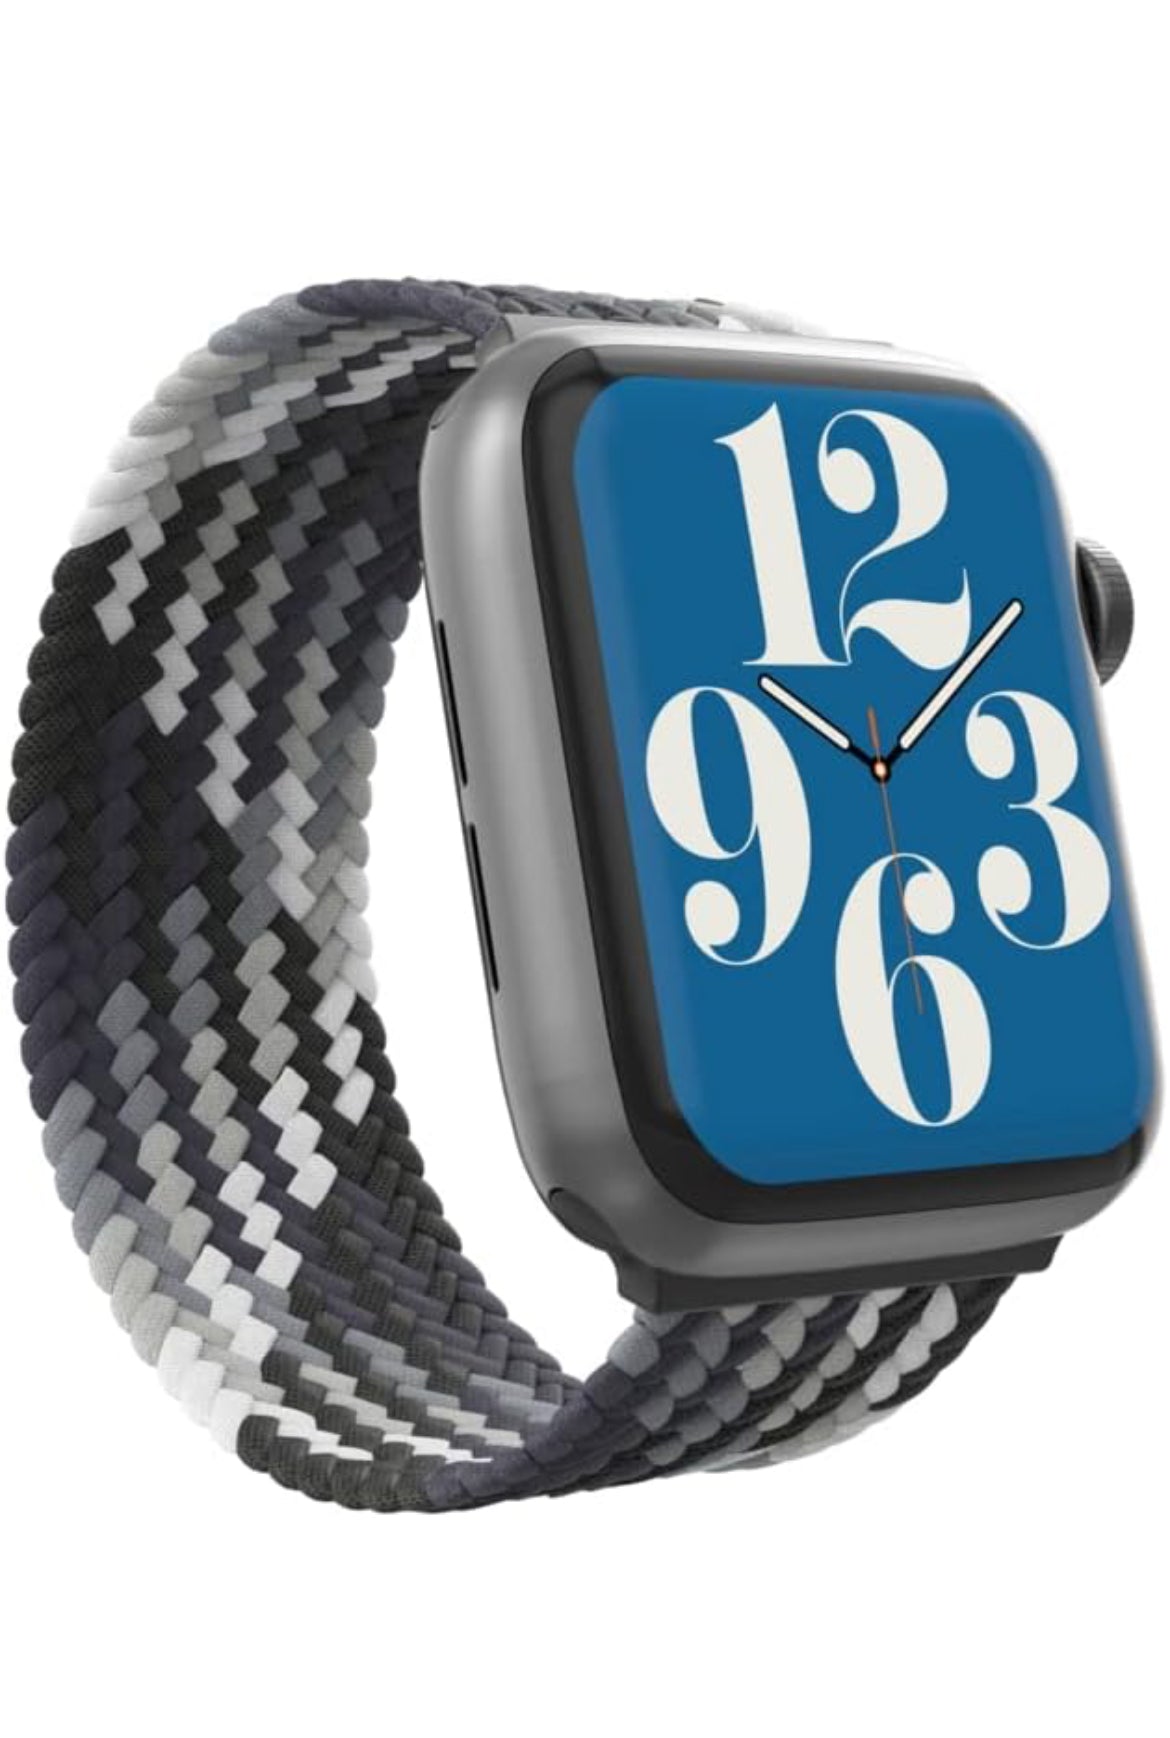 ZAGG Gear4 Braided Stretchy Solo Loop Band – LG – Storm - Compatible with Apple Watch 42mm 44mm 45mm, Elastic Strap Wristbands for iWatch Series 7/6/SE/5/4/3/2/1, Large (705009501) - Selzalot